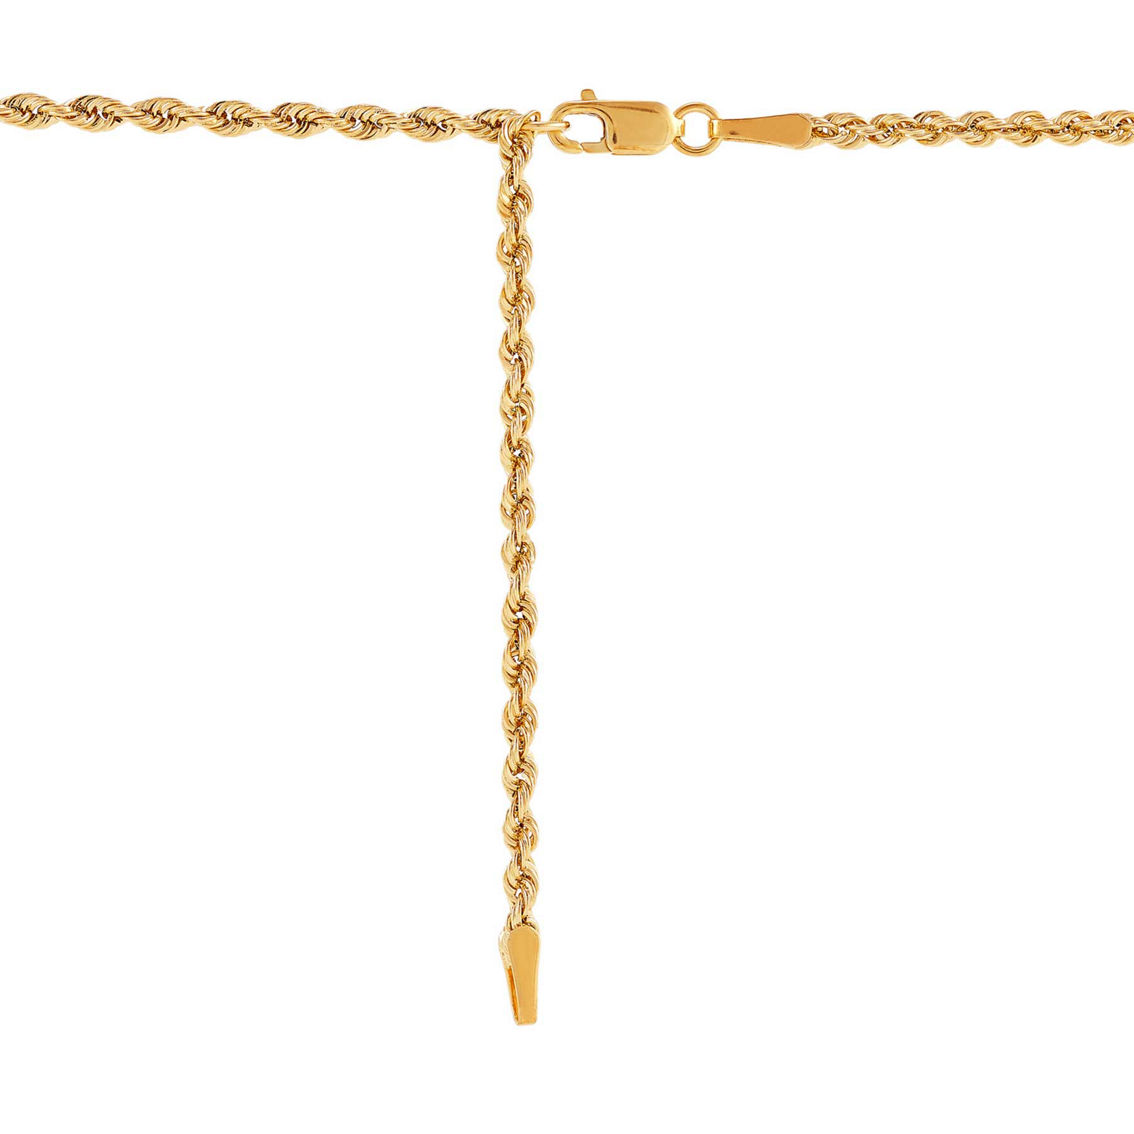 Samuel Aaron 14K Yellow Gold Lock with Key 16 in. Necklace - Image 3 of 4